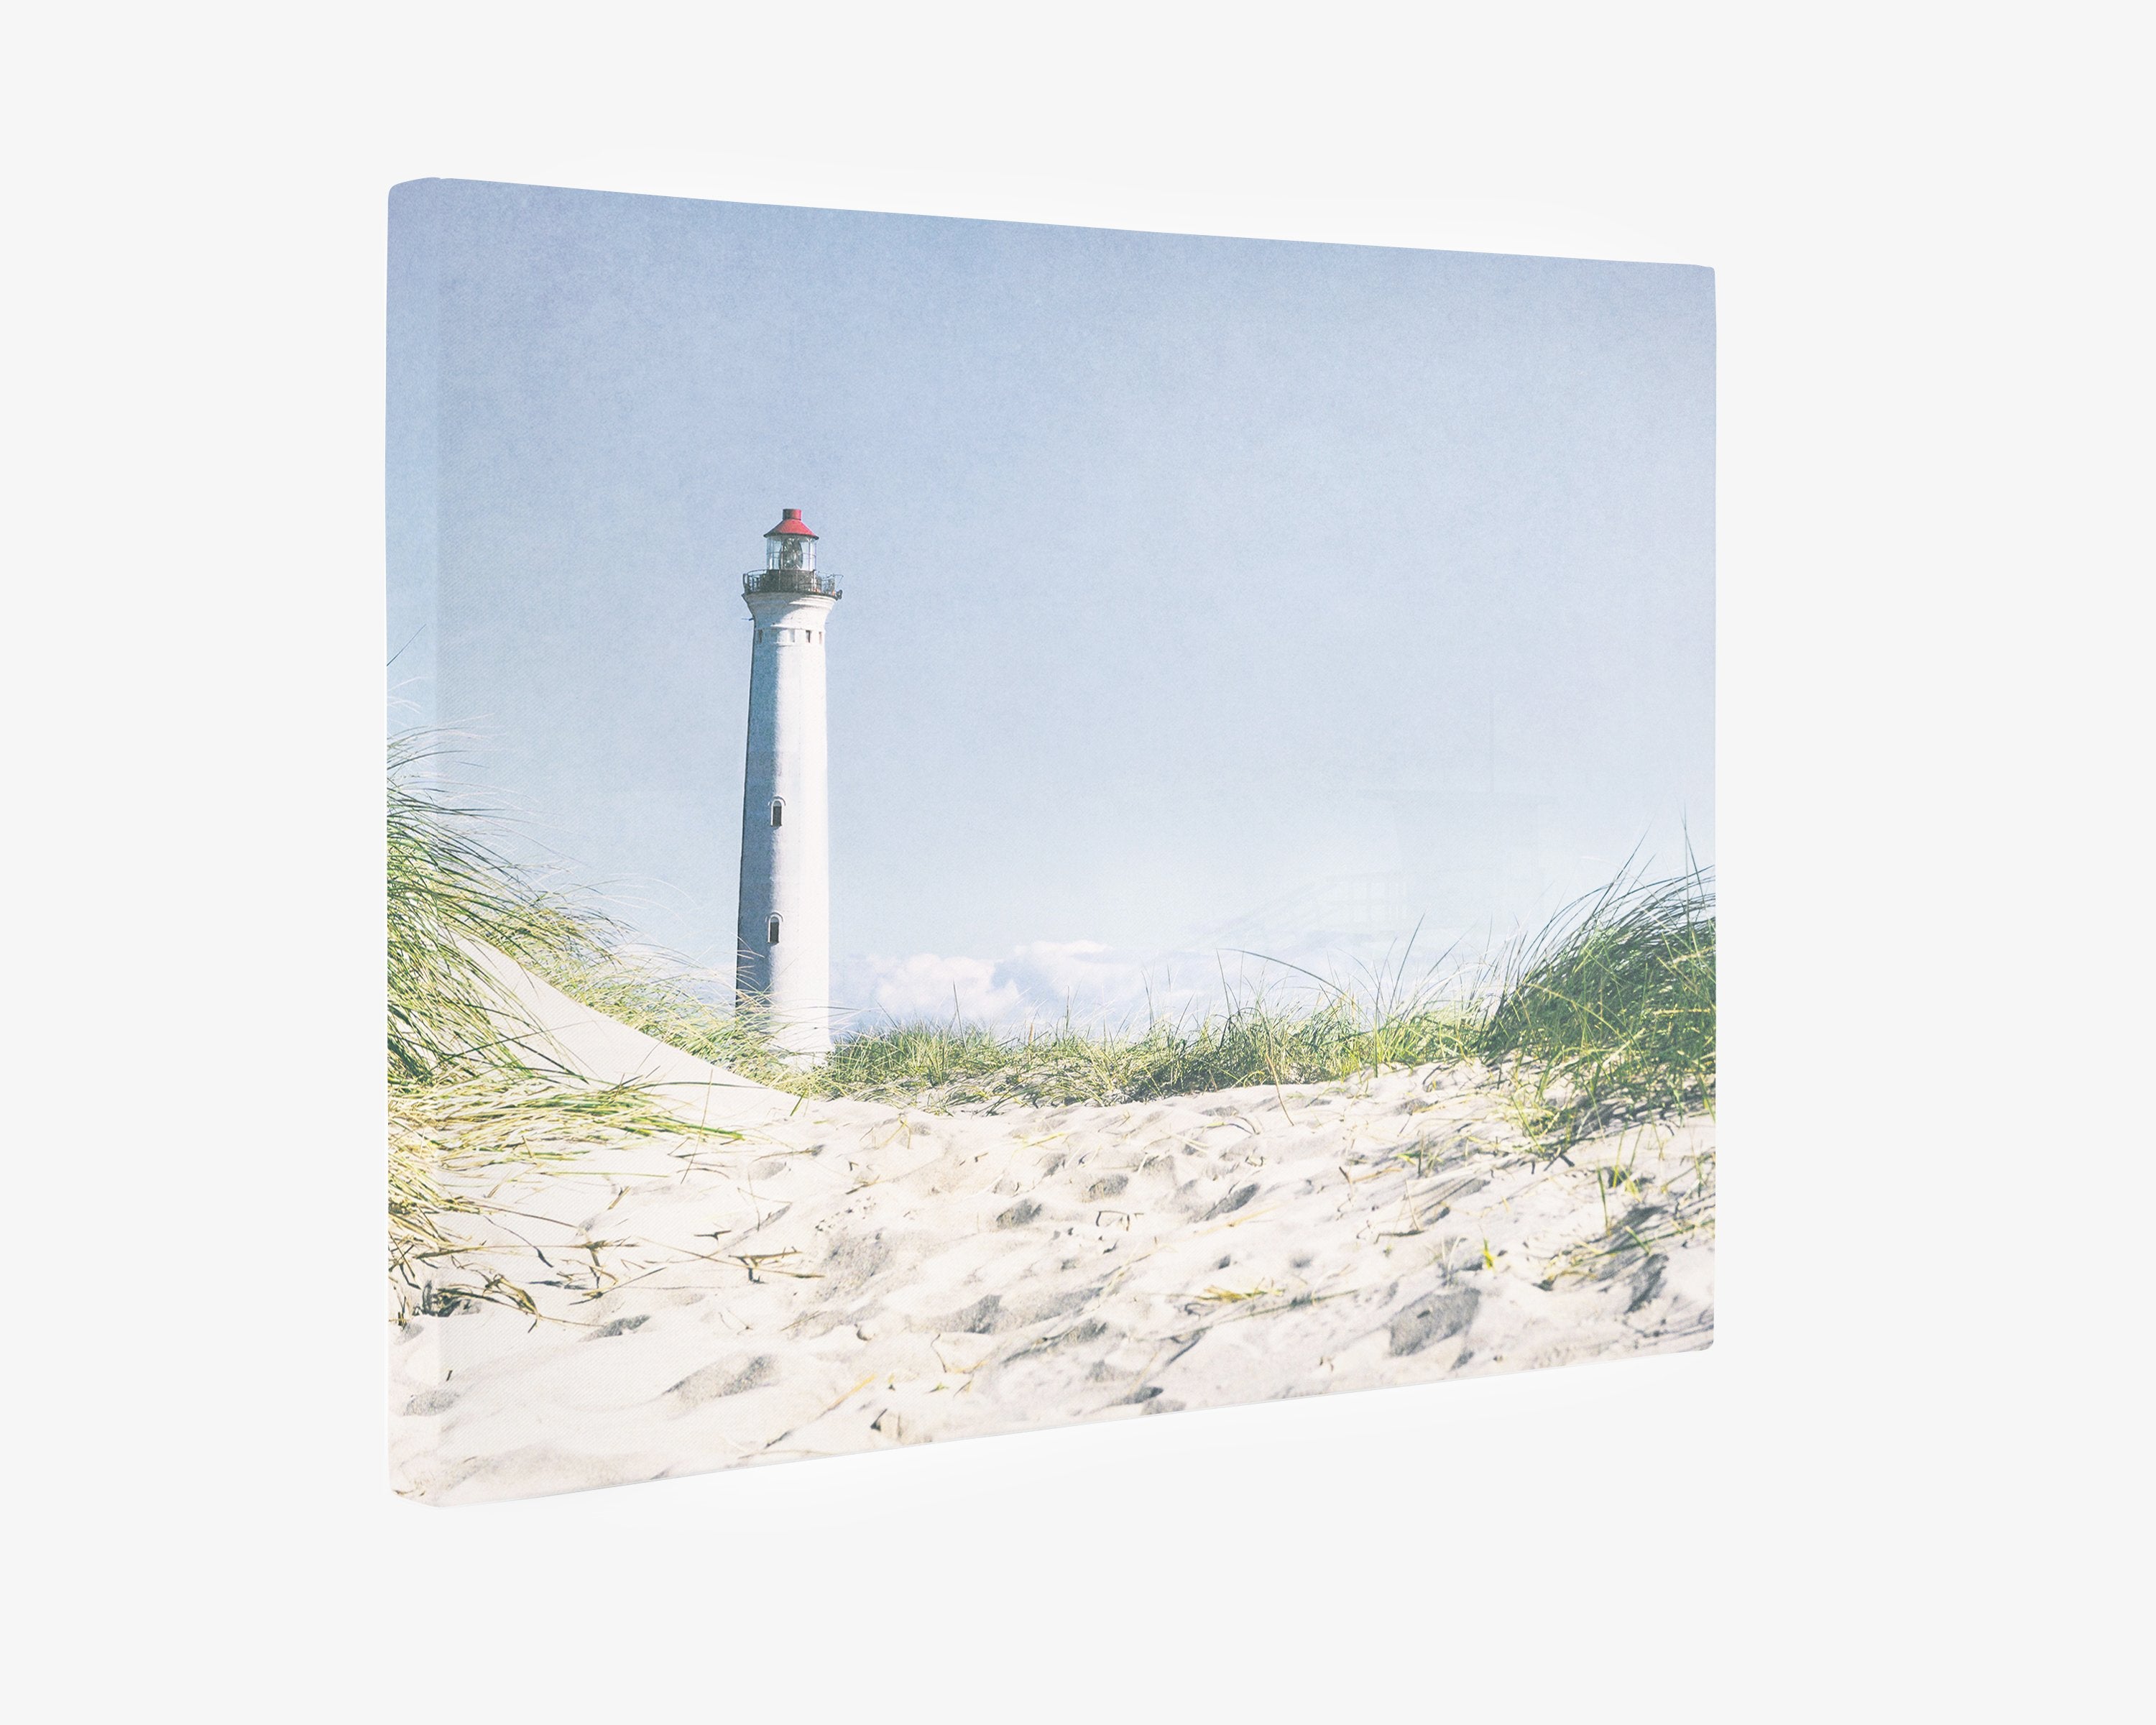 Canvas print of a lighthouse showing the mirrored edge